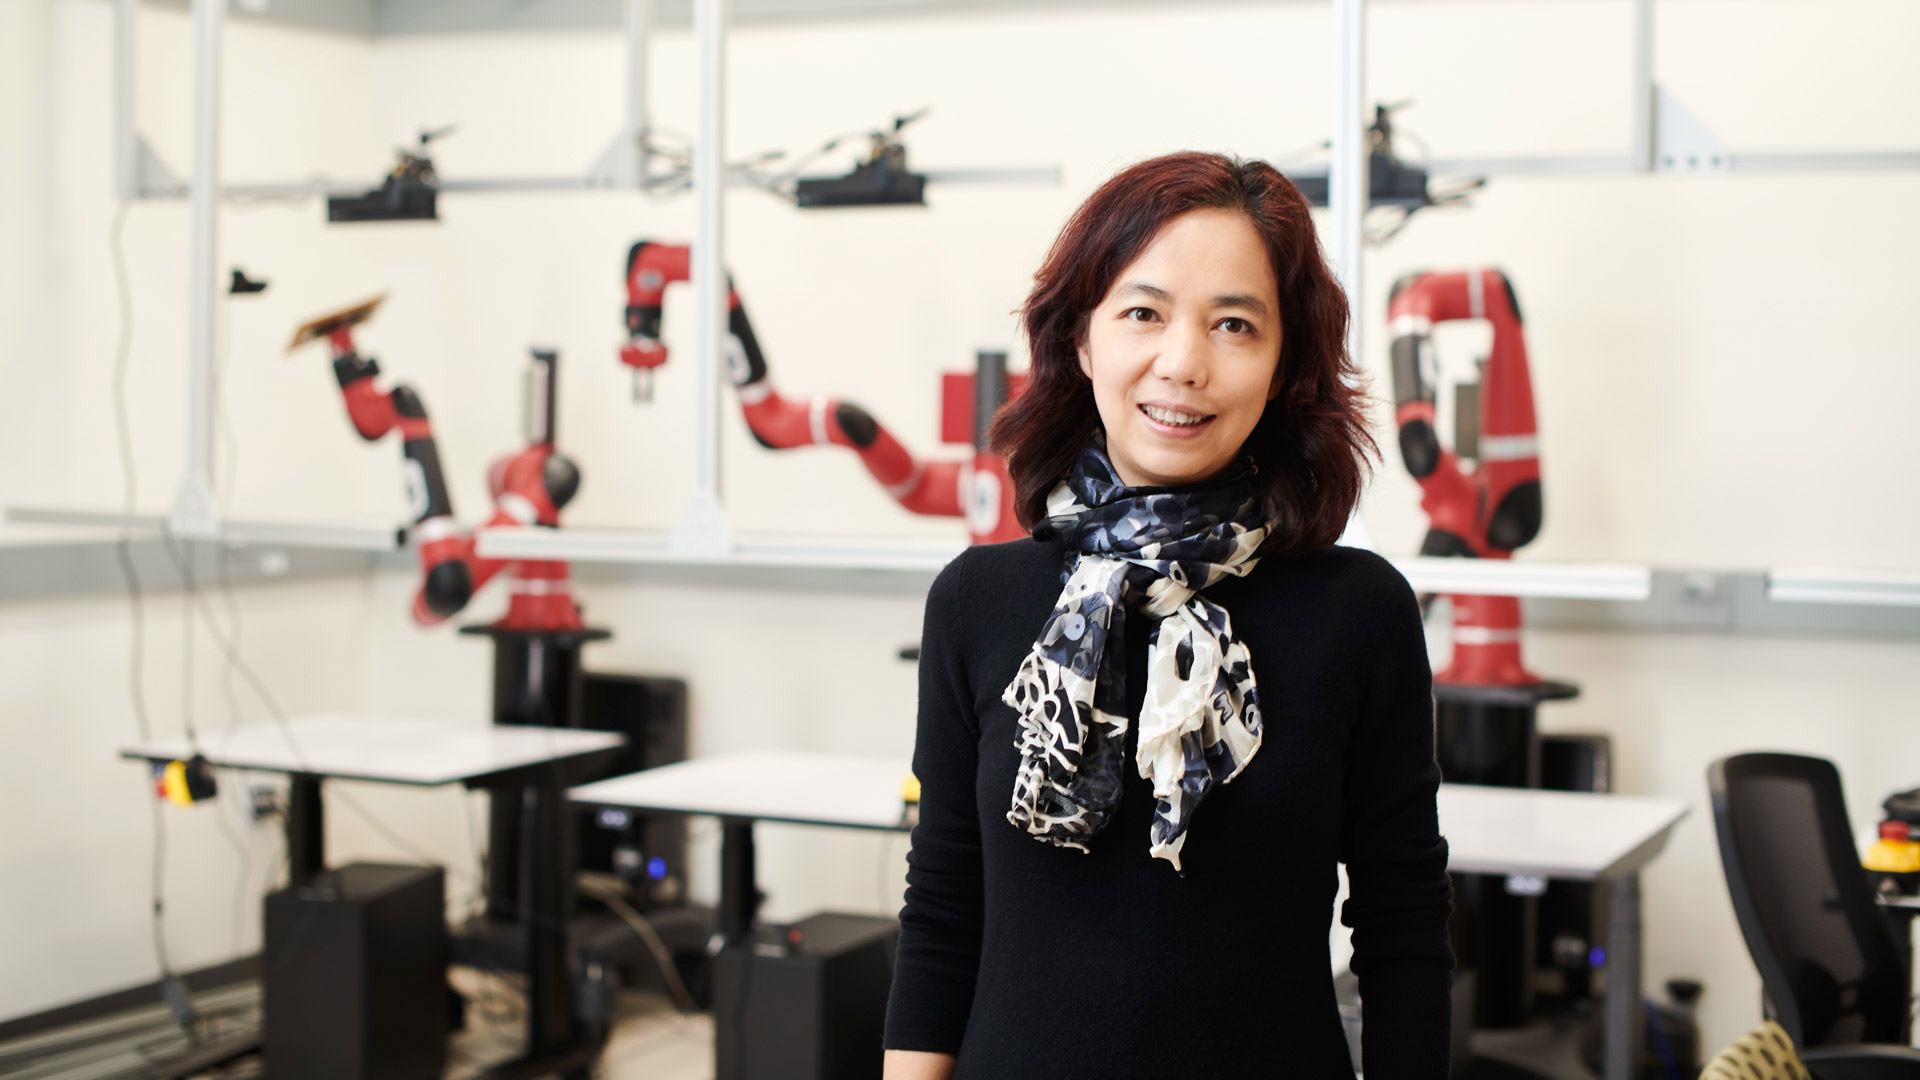 AI is at an inflection point, Fei-Fei Li says